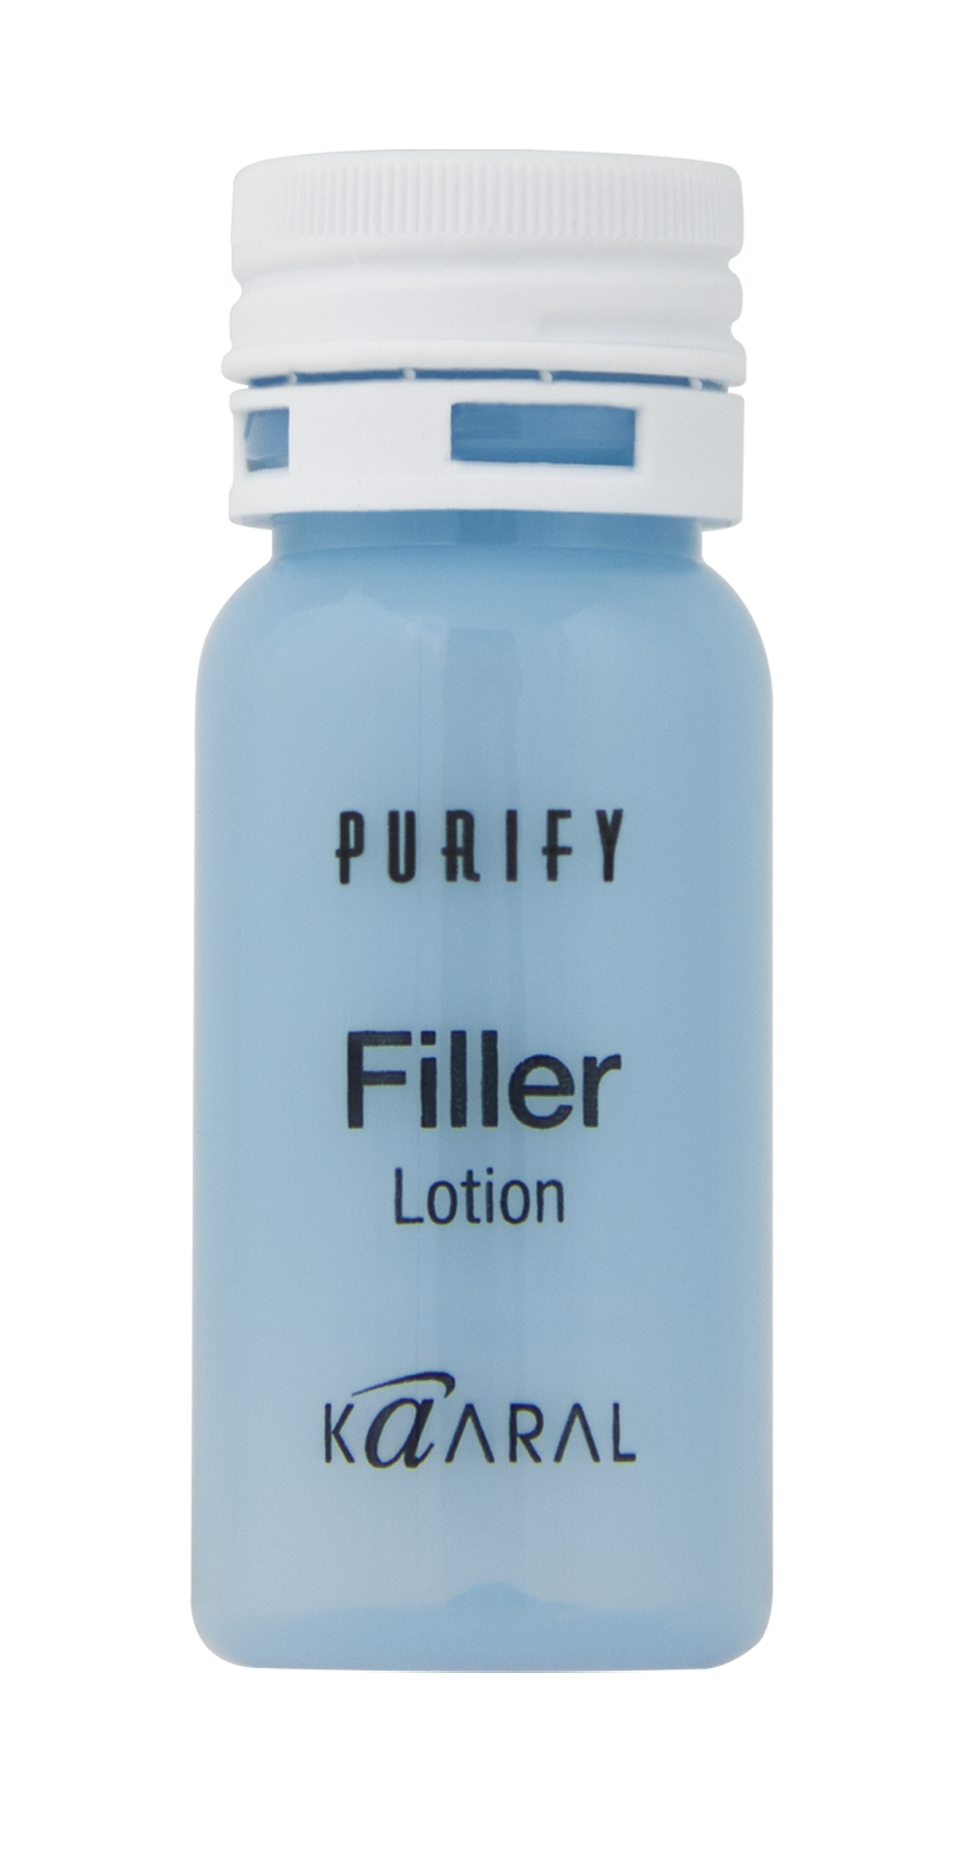 RETAIL PURIFY FILLER LOTION